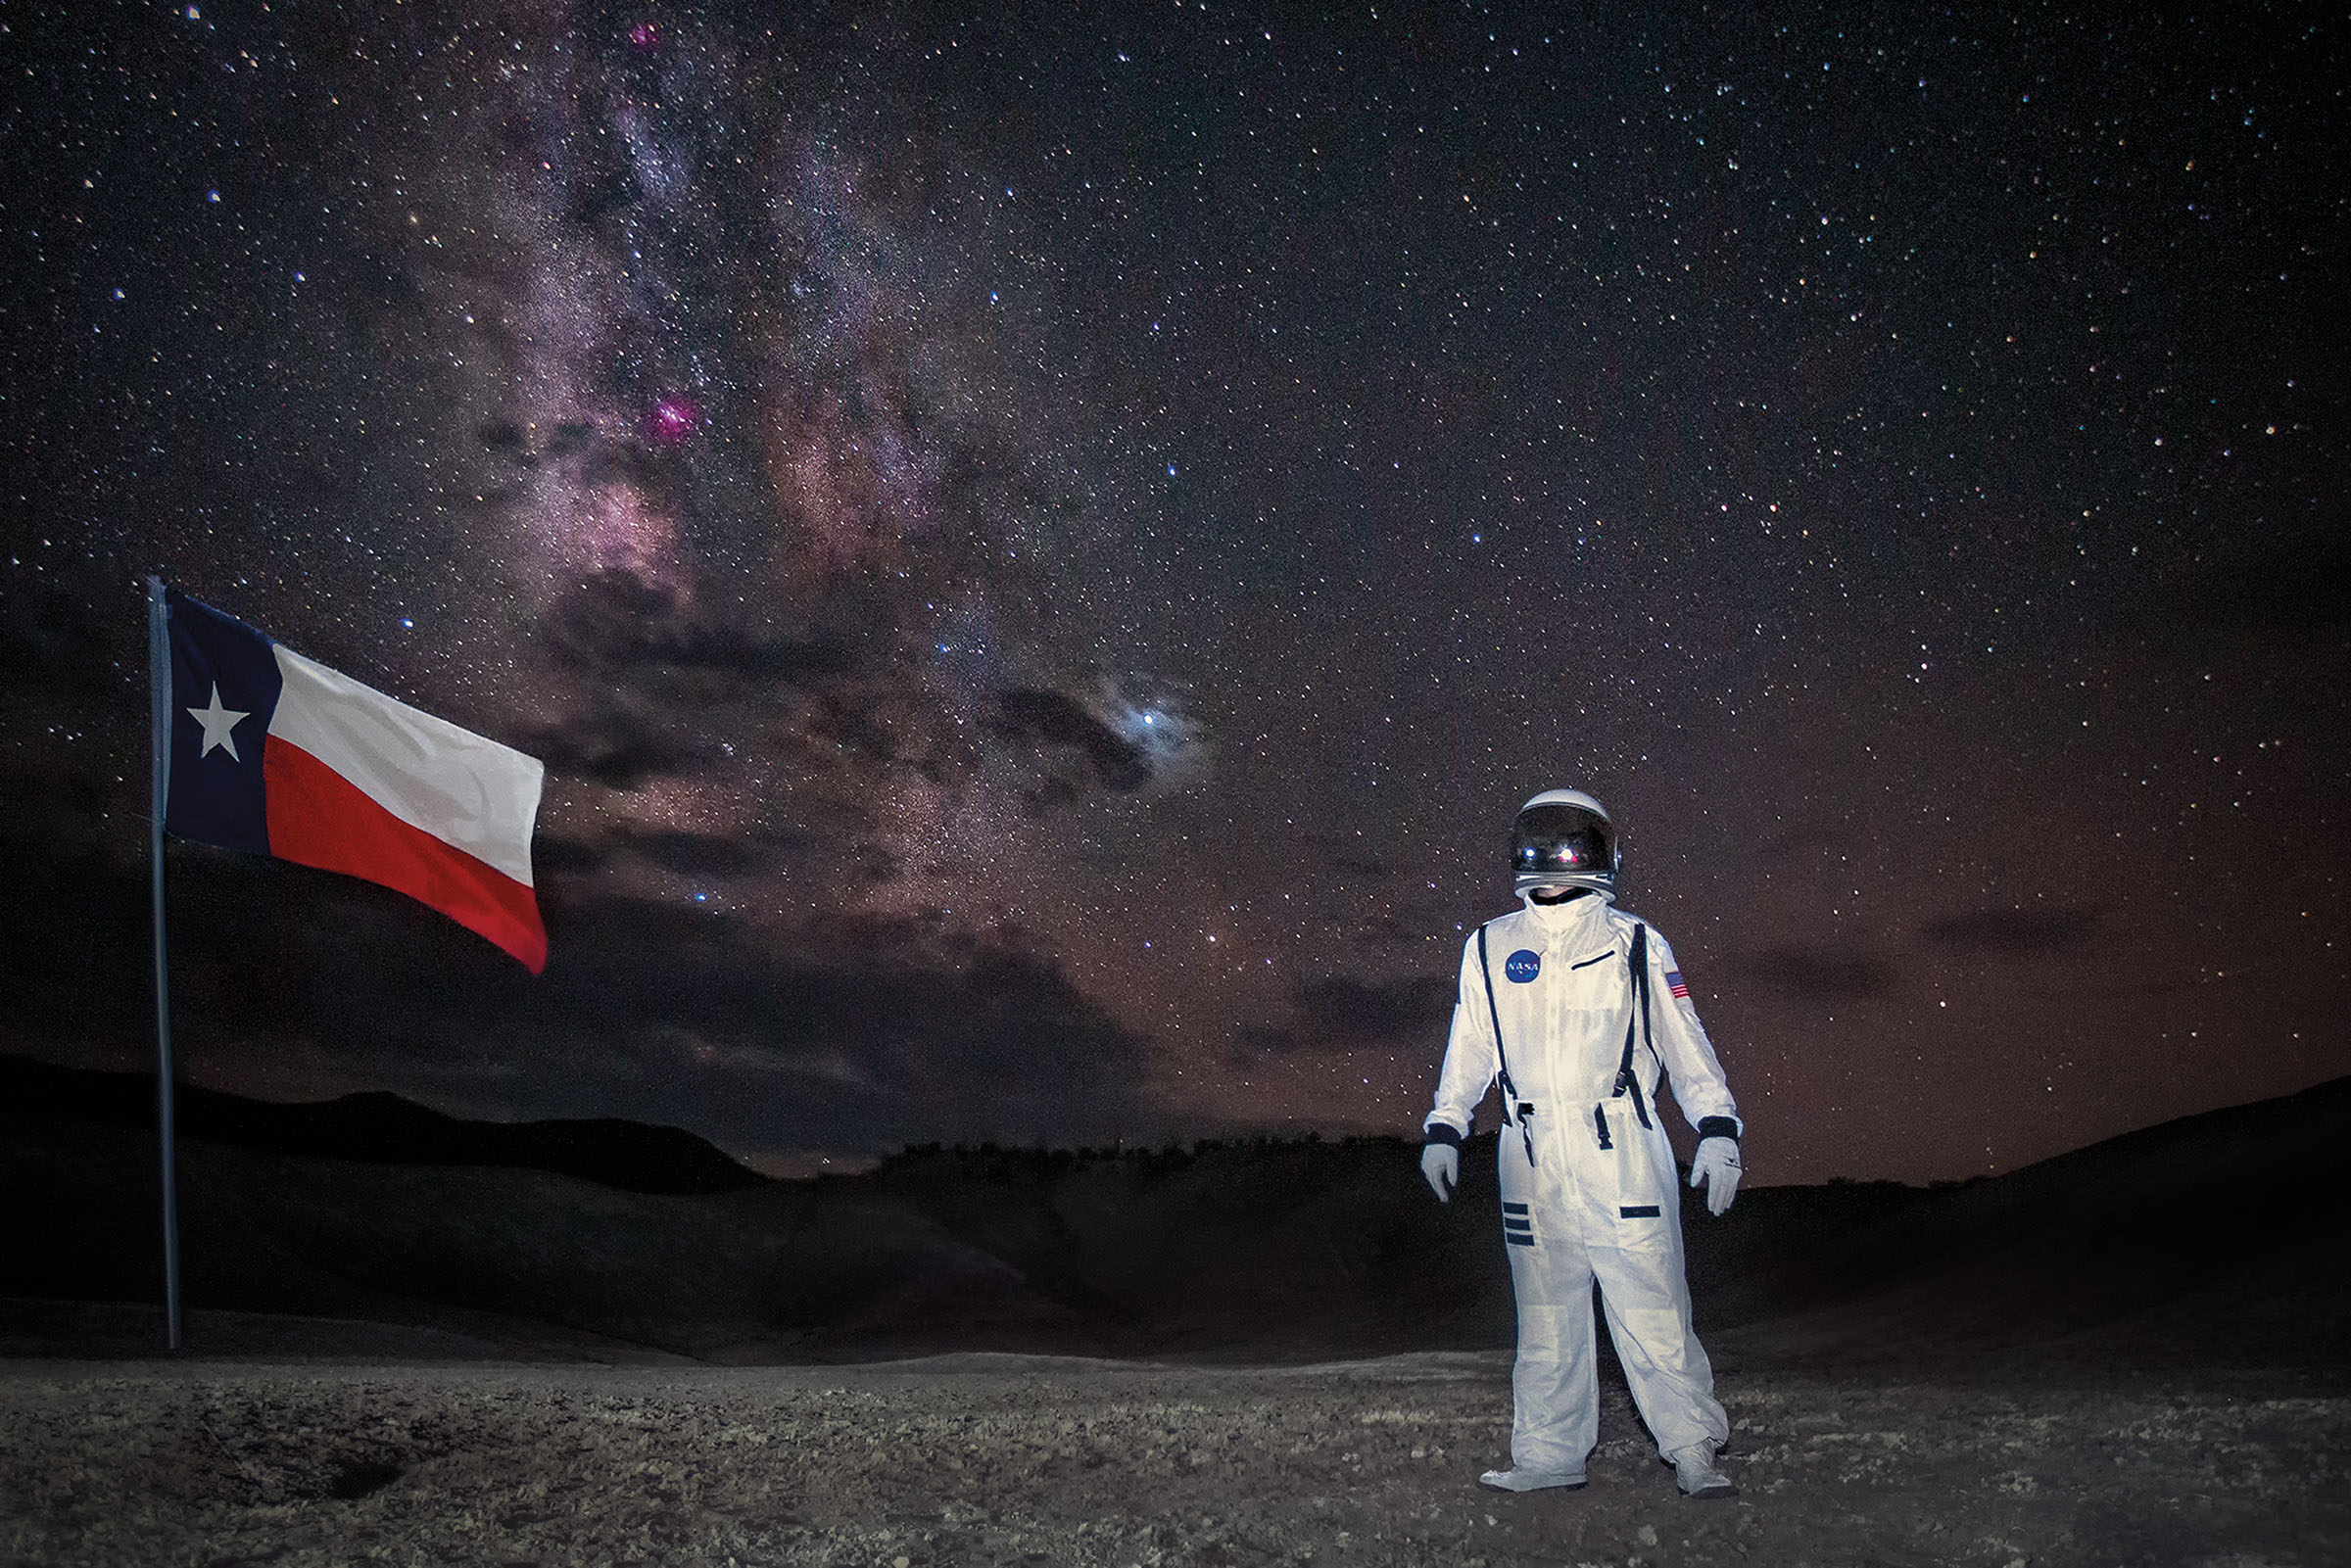 A person in an astronaut suit stands next to a Texas flag underneath a large purple and black night sky filled with stars